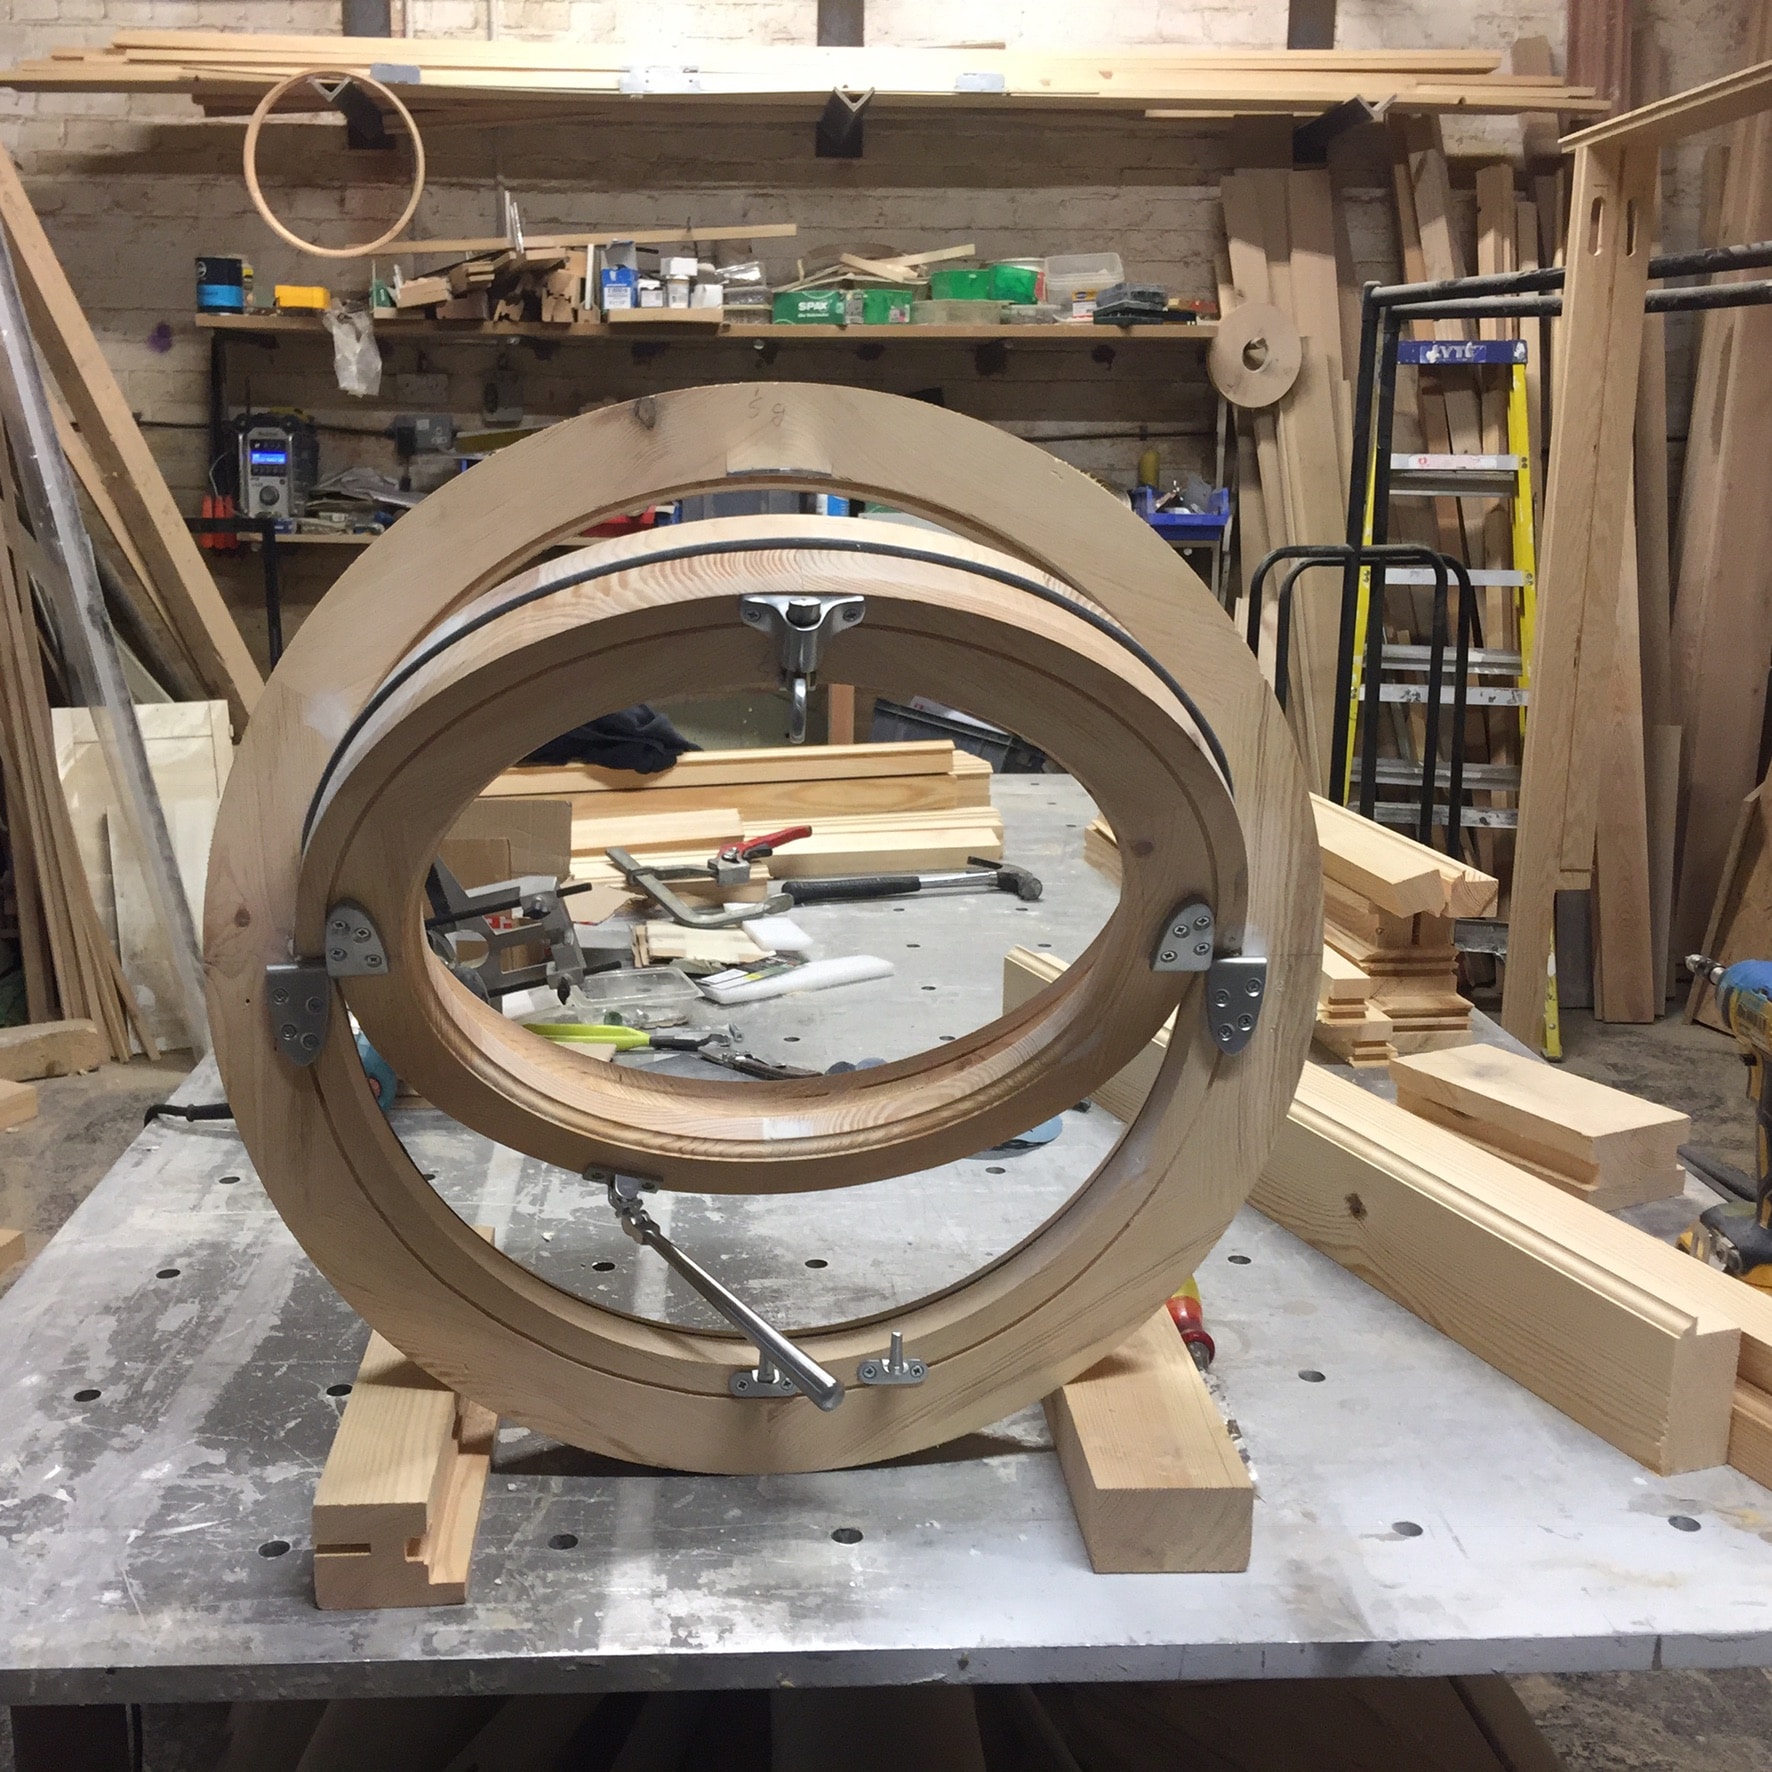 Round window in production.